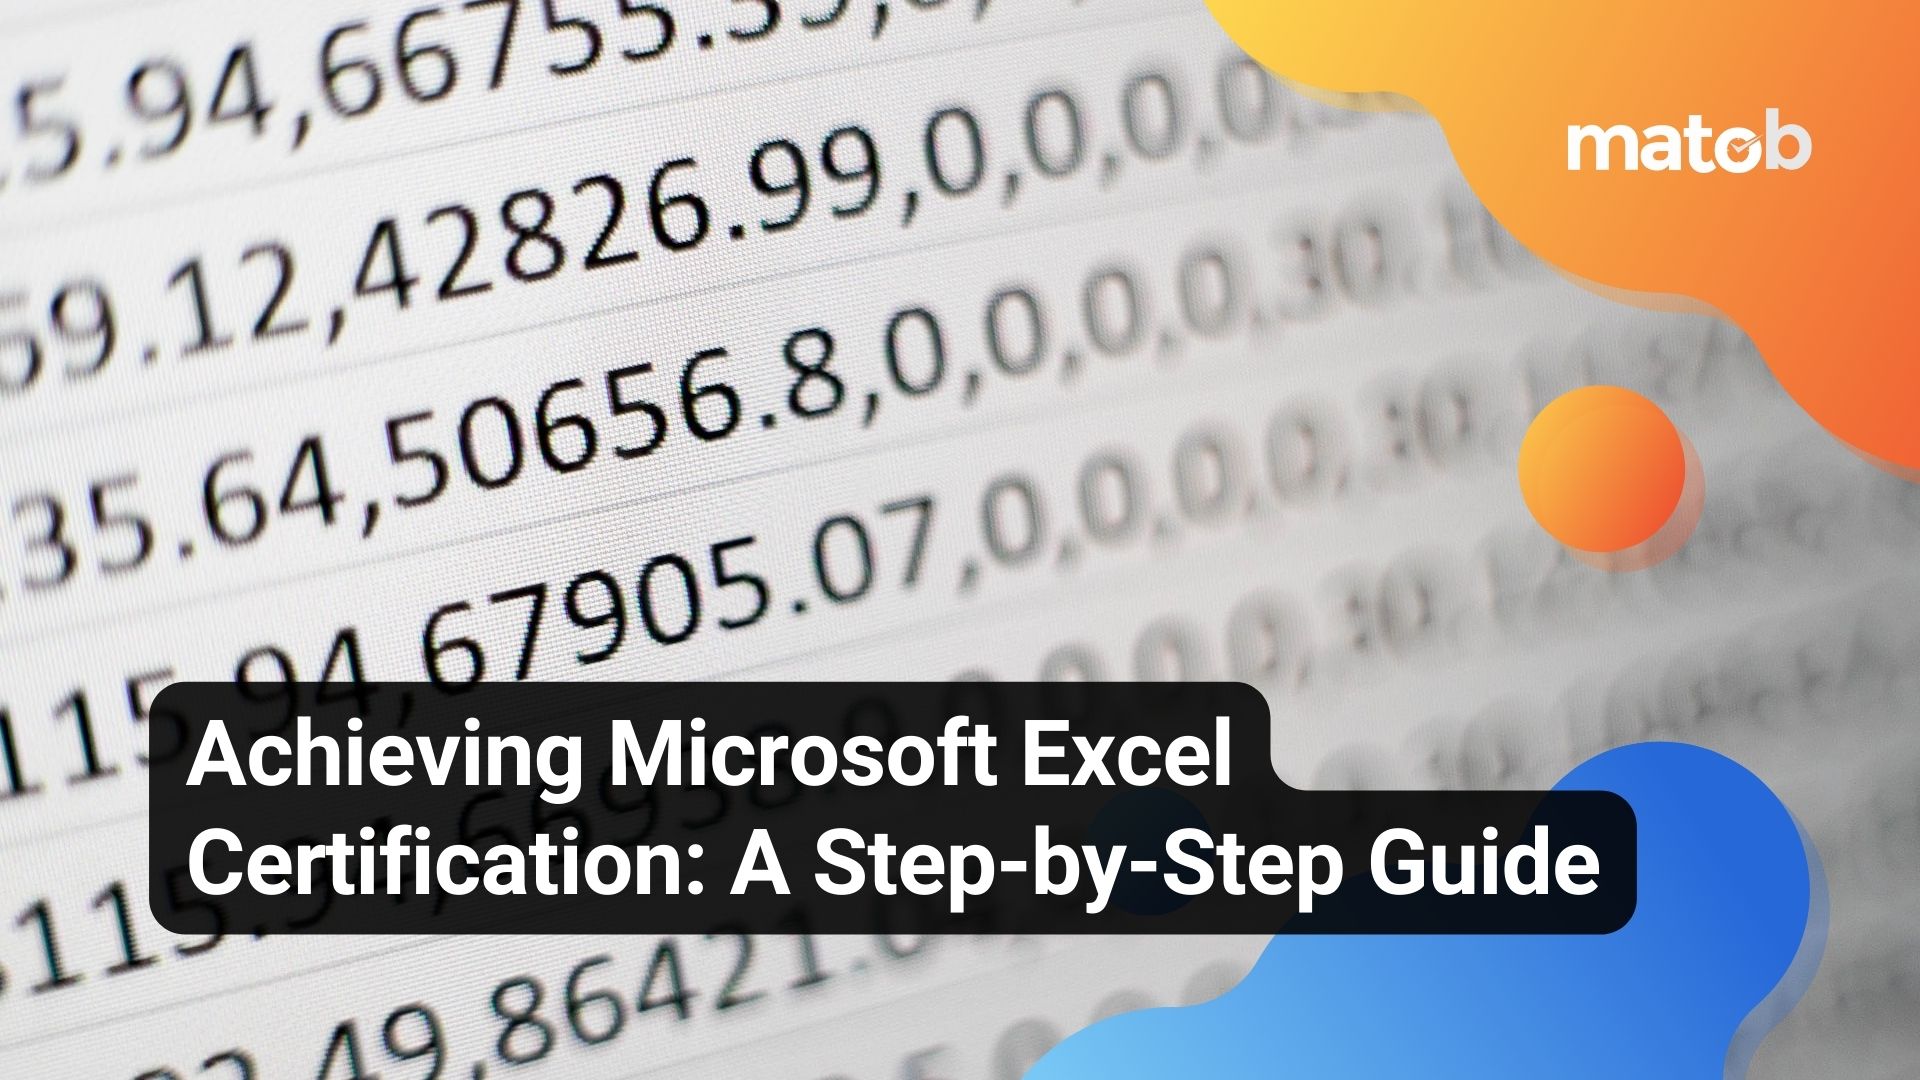 Achieving Microsoft Excel Certification: A Step-by-Step Guide